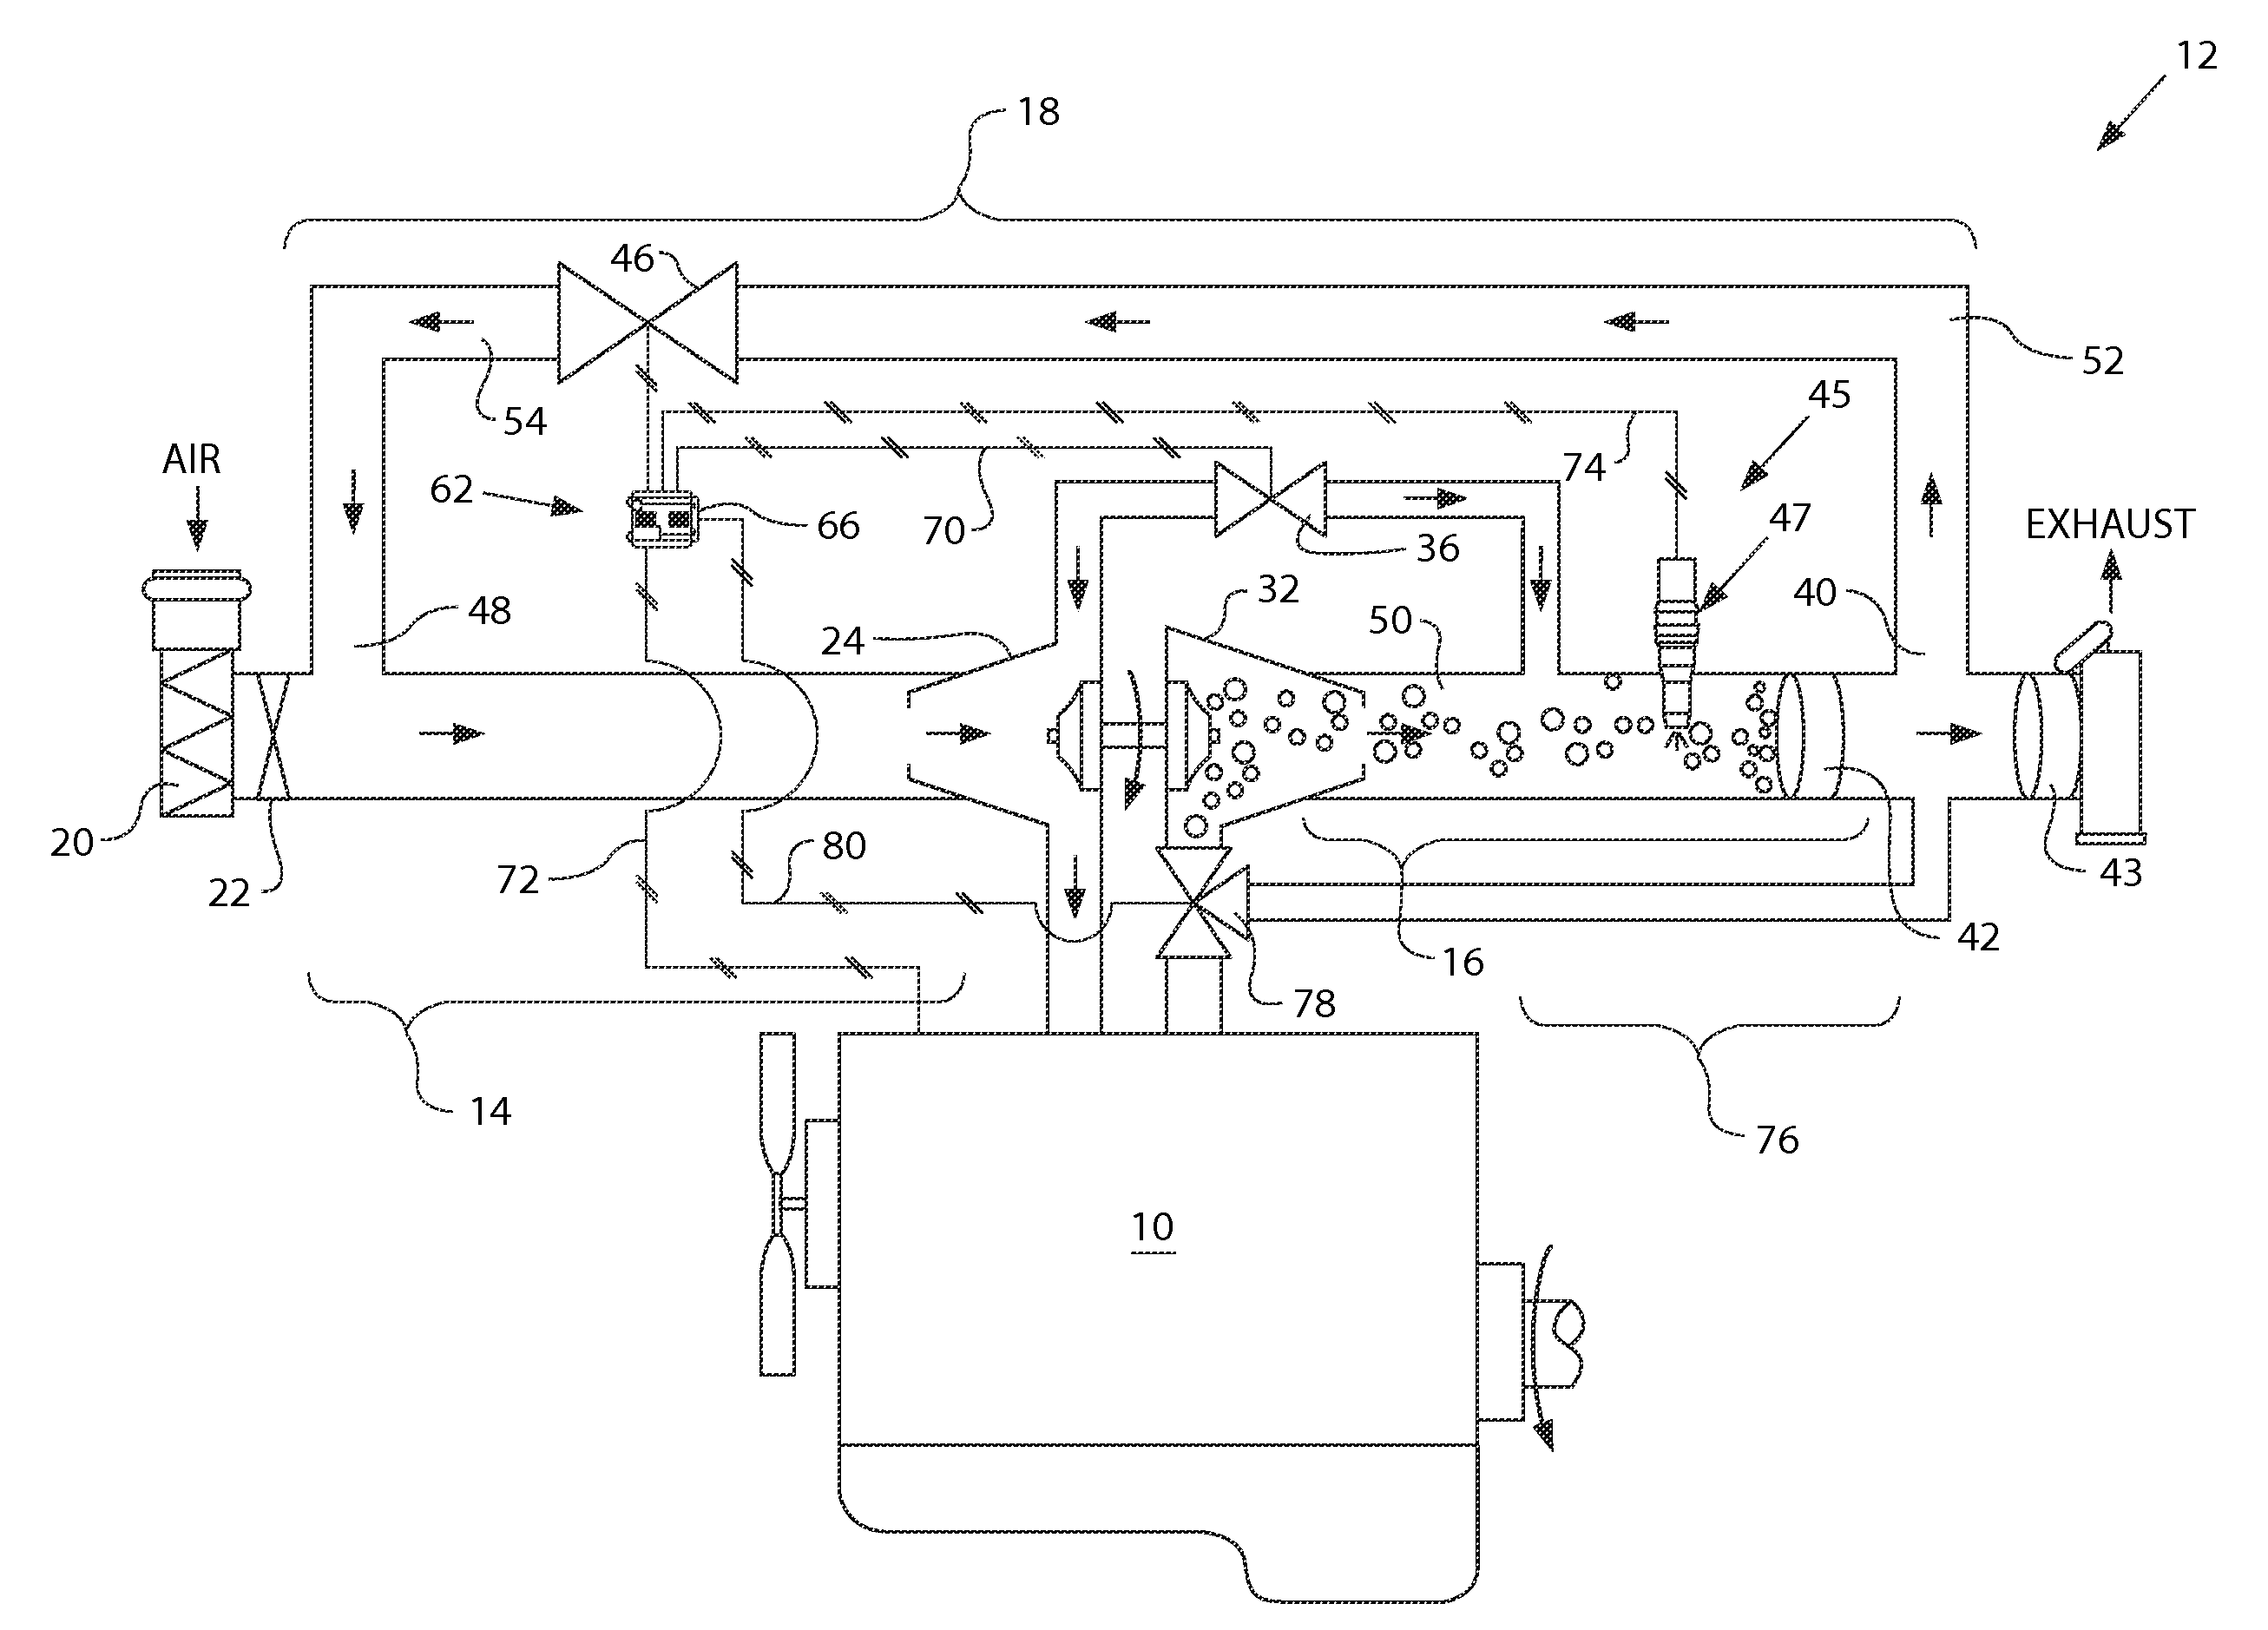 Method of controlling fuel in an exhaust treatment system implementing temporary engine control